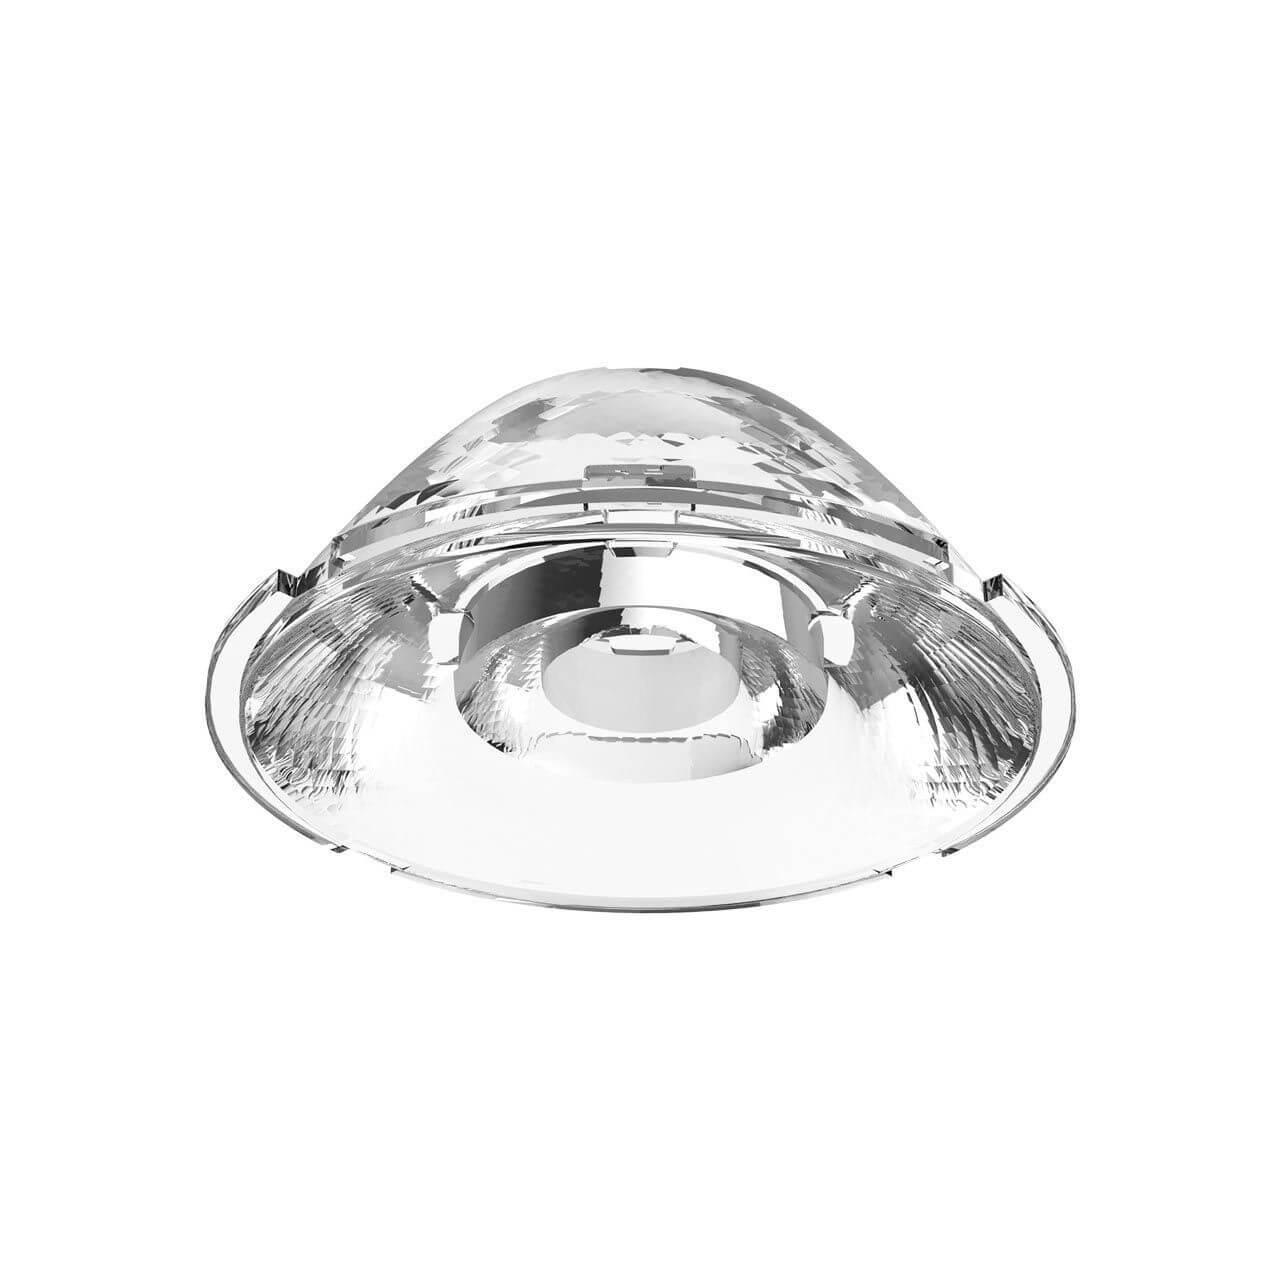   Ideal Lux Quick 15W / 21W Lens 45 253558